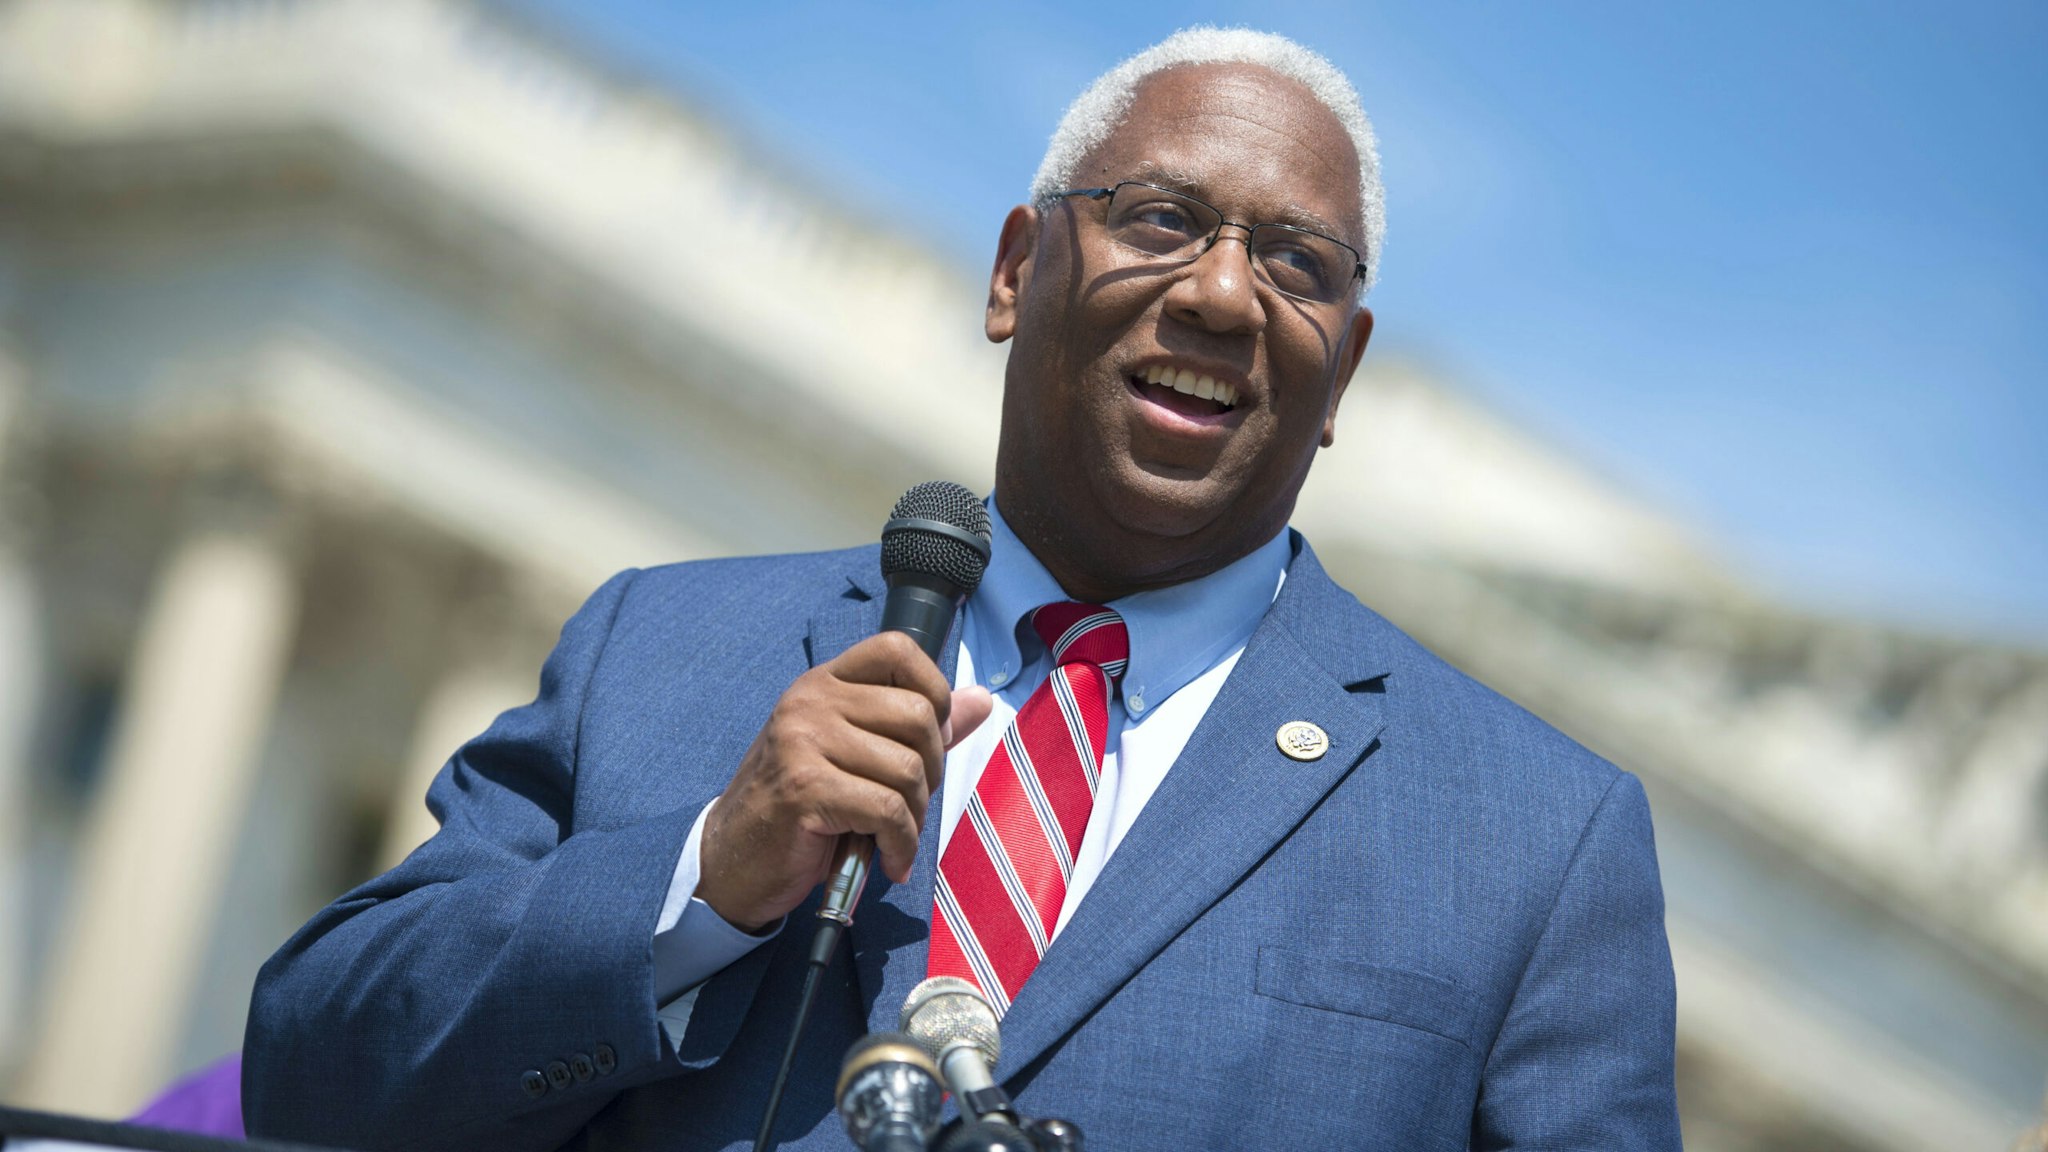 UNITED STATES - MAY 7: Rep. Donald McEachin, D-Va., holds a news conference with faith leaders to "urge lawmakers to reject proposed cuts to the Supplemental Nutrition Assistance Program (SNAP) in the Farm Bill" on Monday, May 7, 2018.